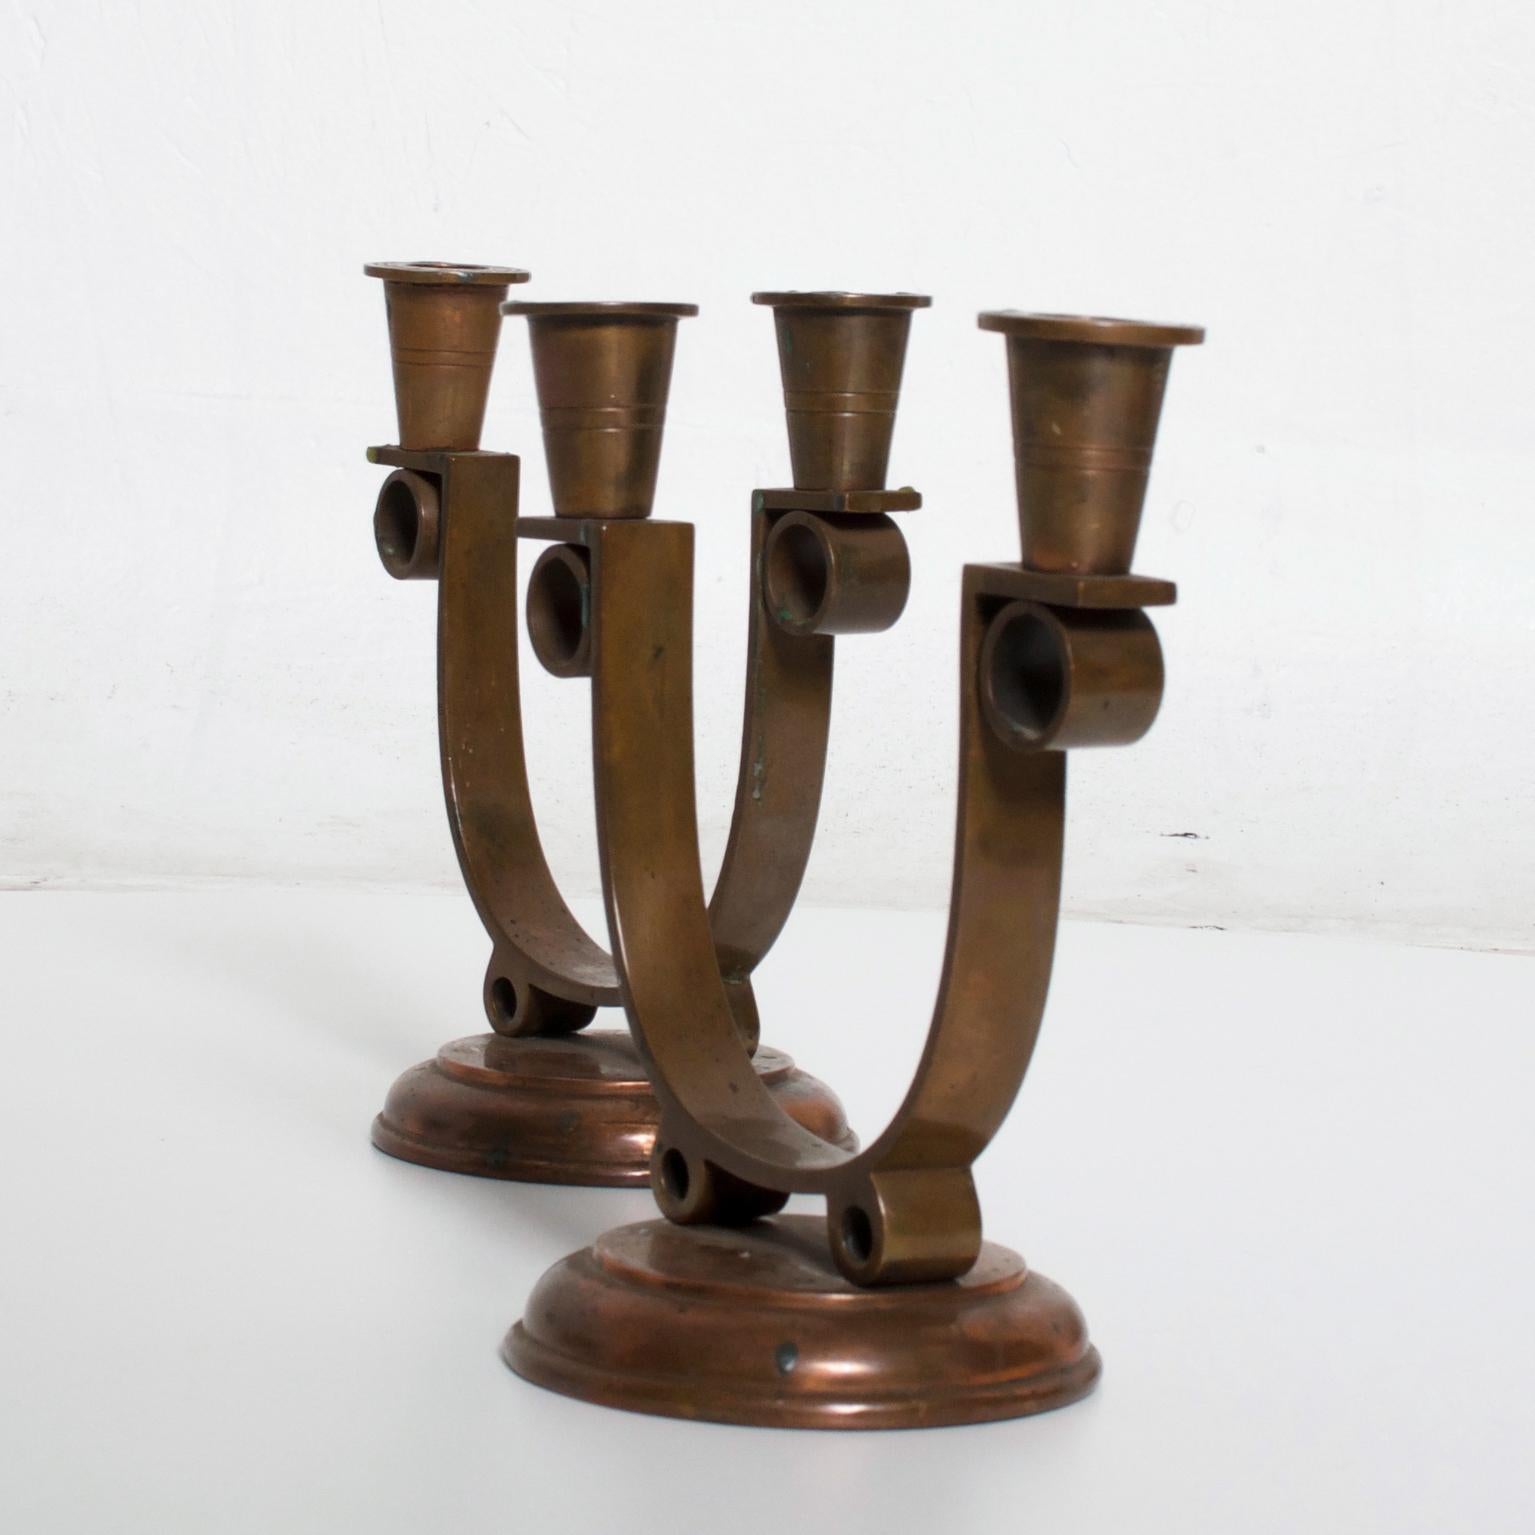 Beautiful Art Deco Pair of Copper Candle Holders Fabulous art deco style. Dimensions is 7 1/2